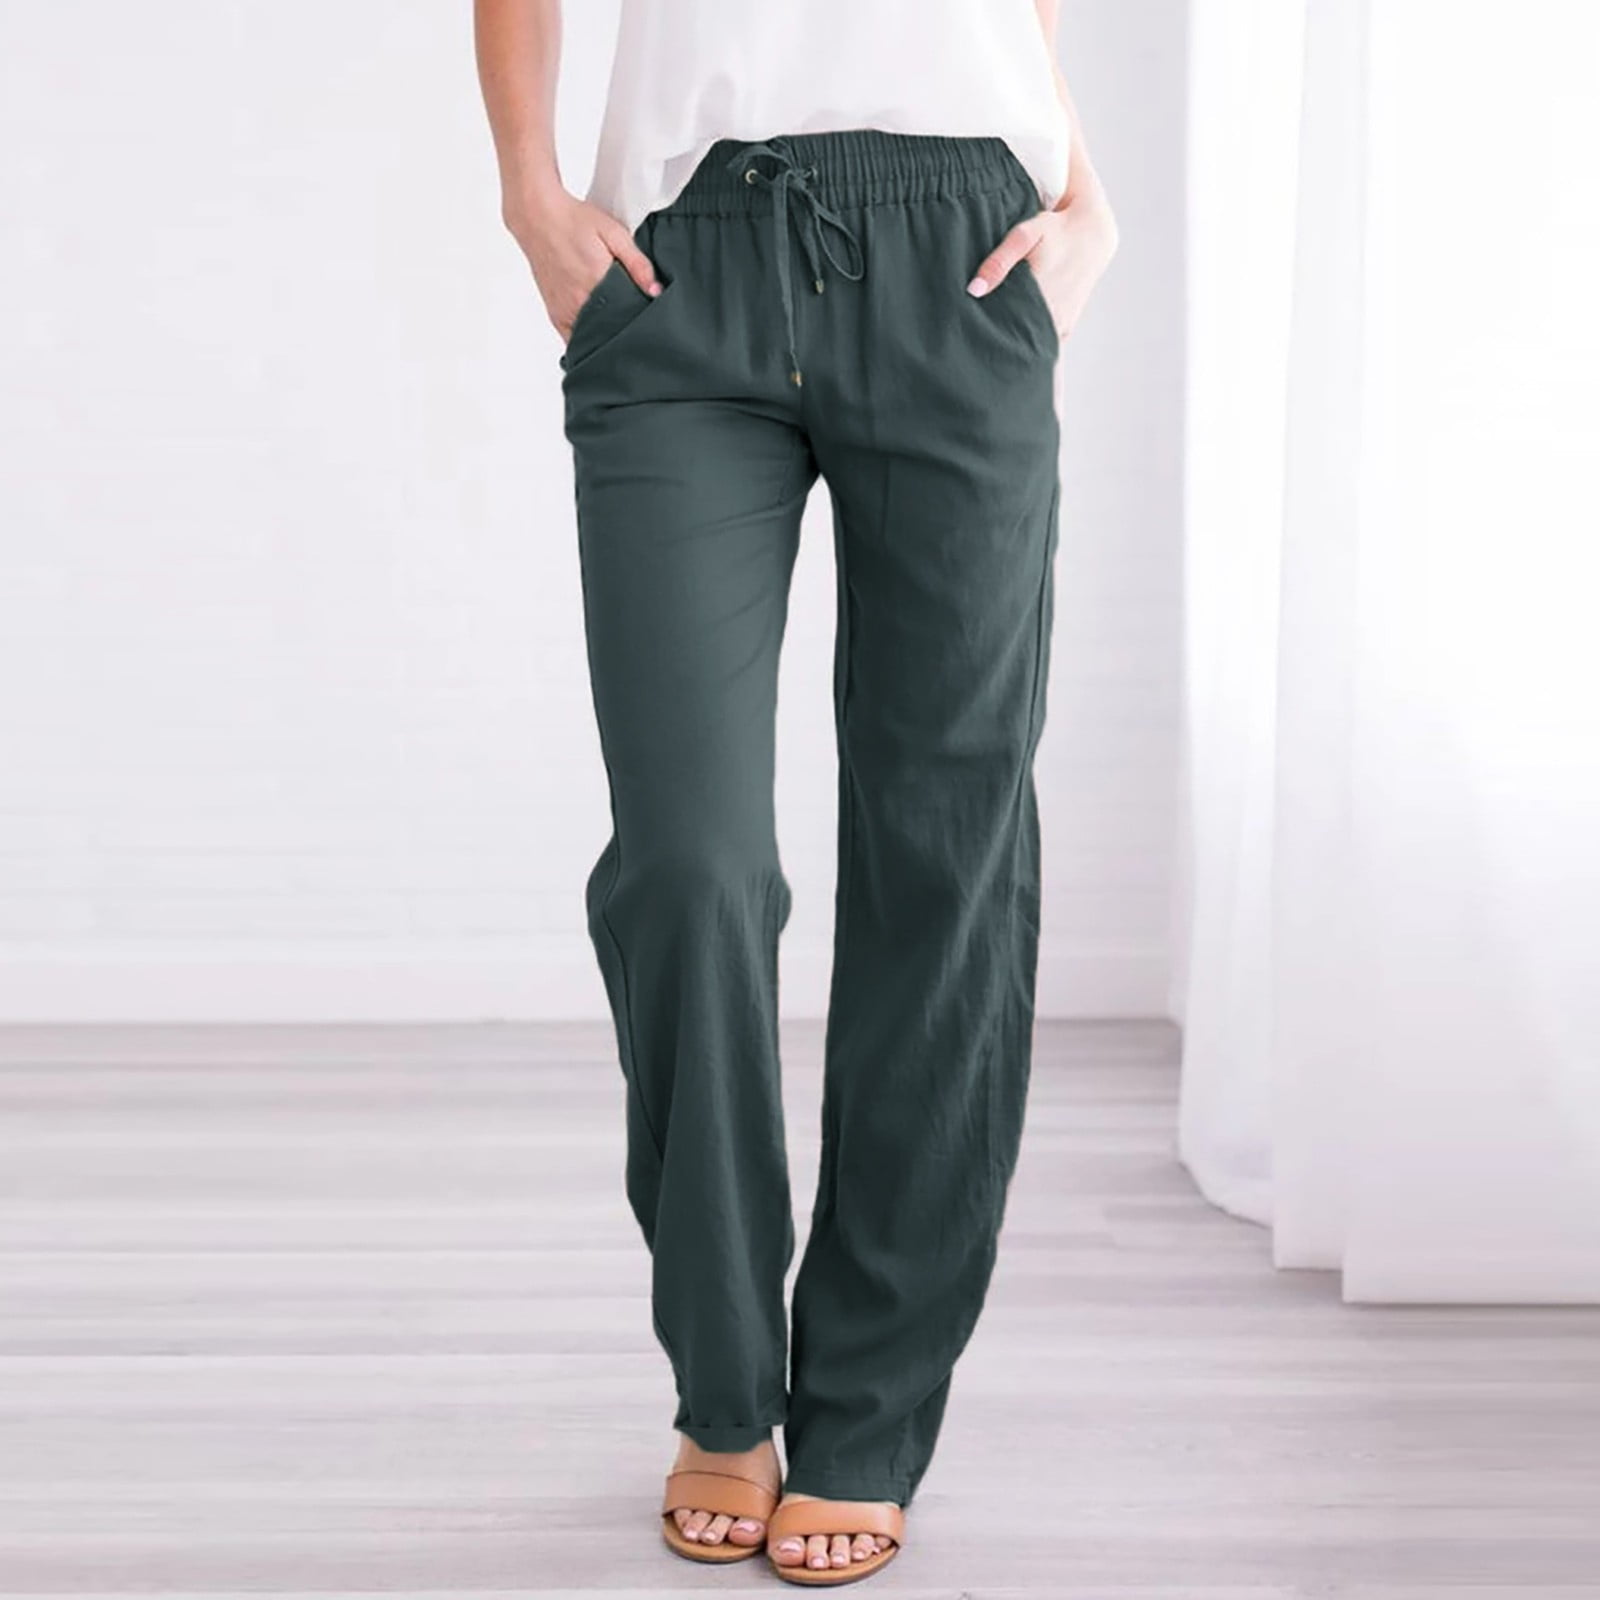 Harpily Women Casual Pants Solid Straight Pants Waist And Long Casual ...